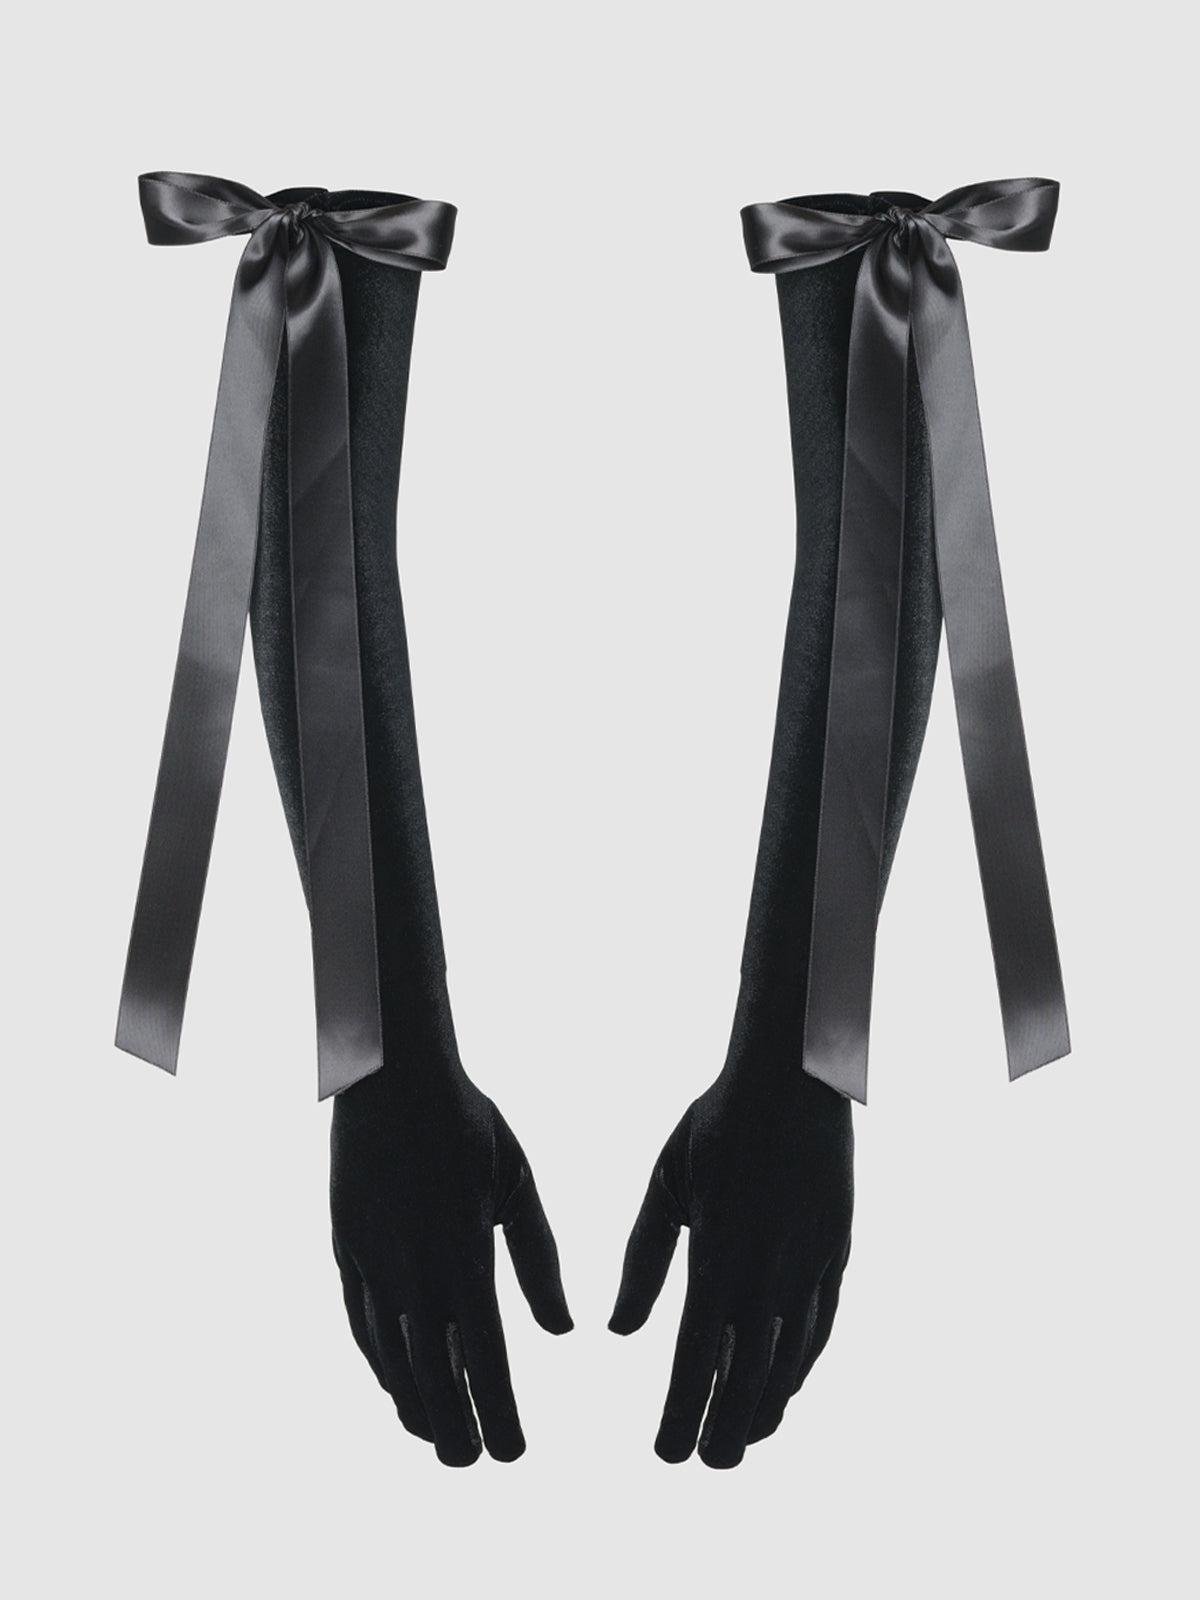 Velvet Long Glove With Satin Bow in Black by FREDERICK'S OF HOLLYWOOD